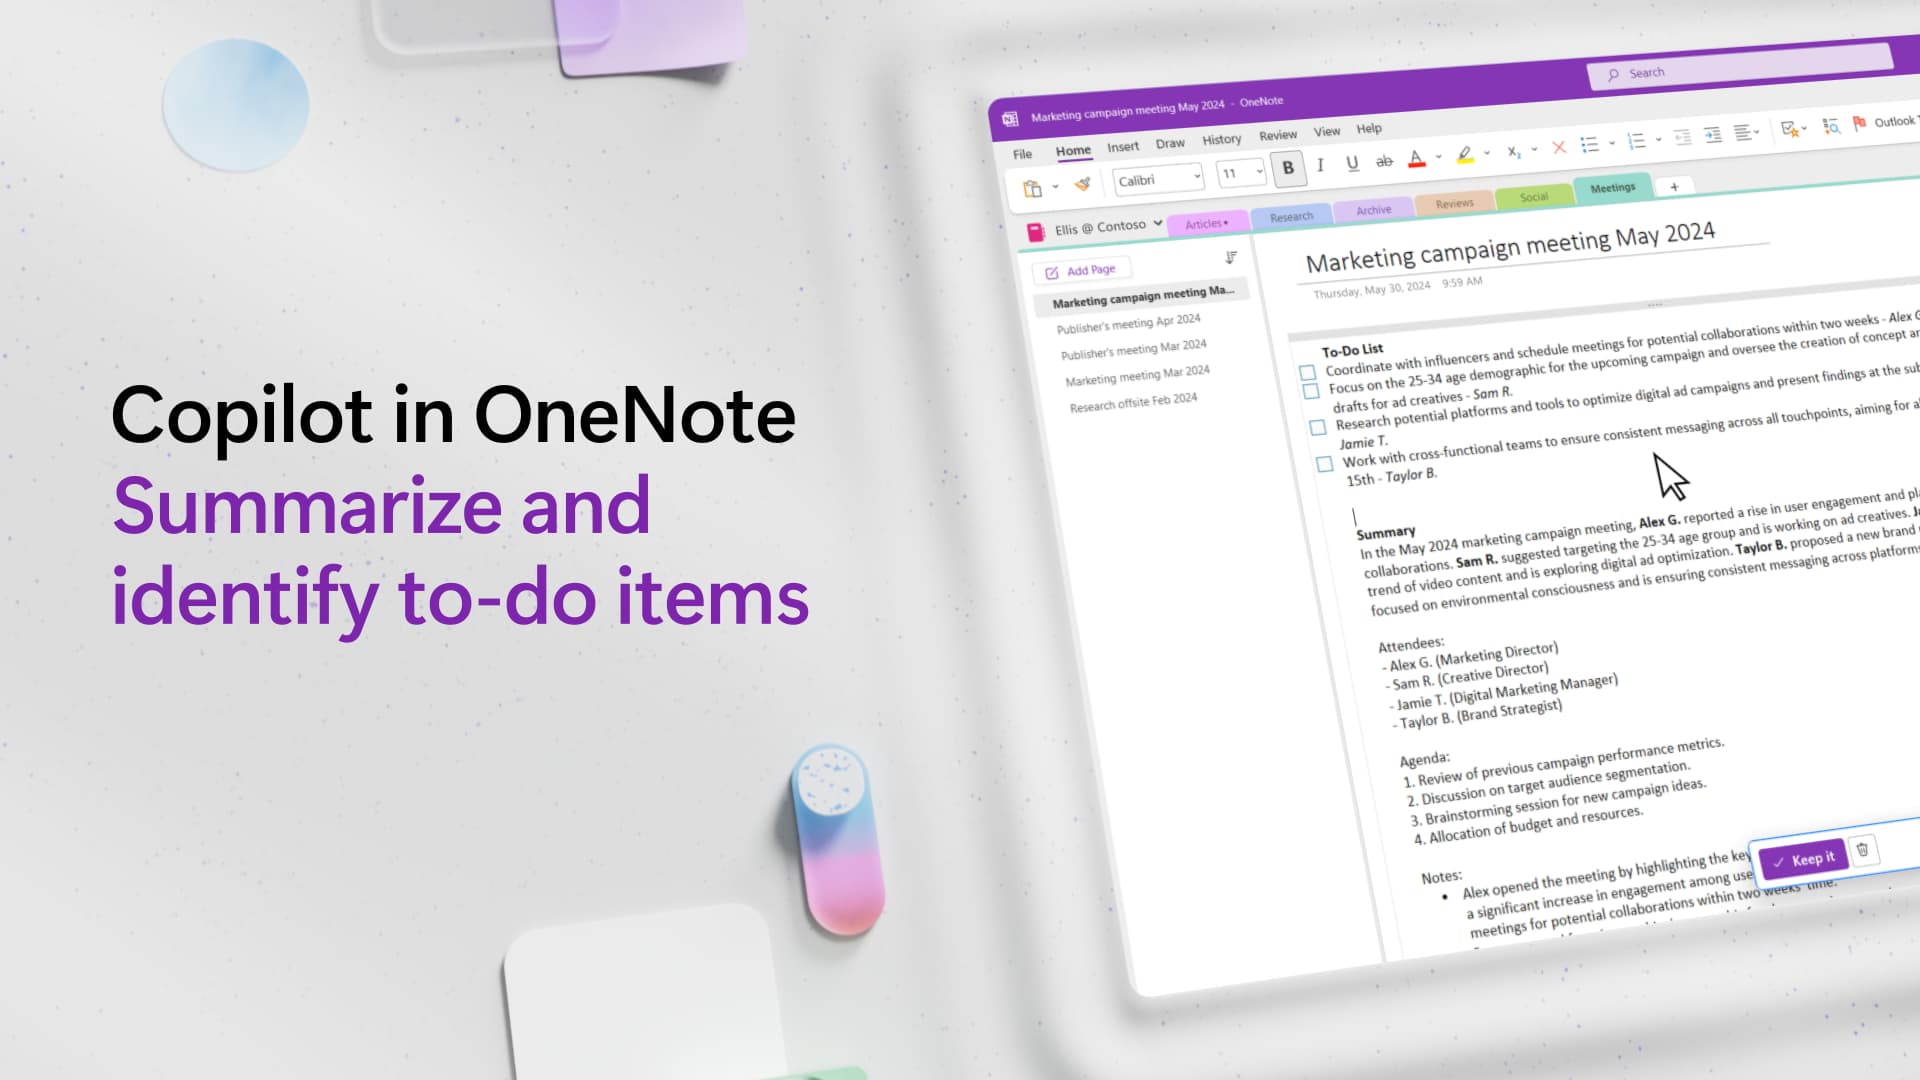 Video: Summarize and identify to-do items with Copilot in OneNote